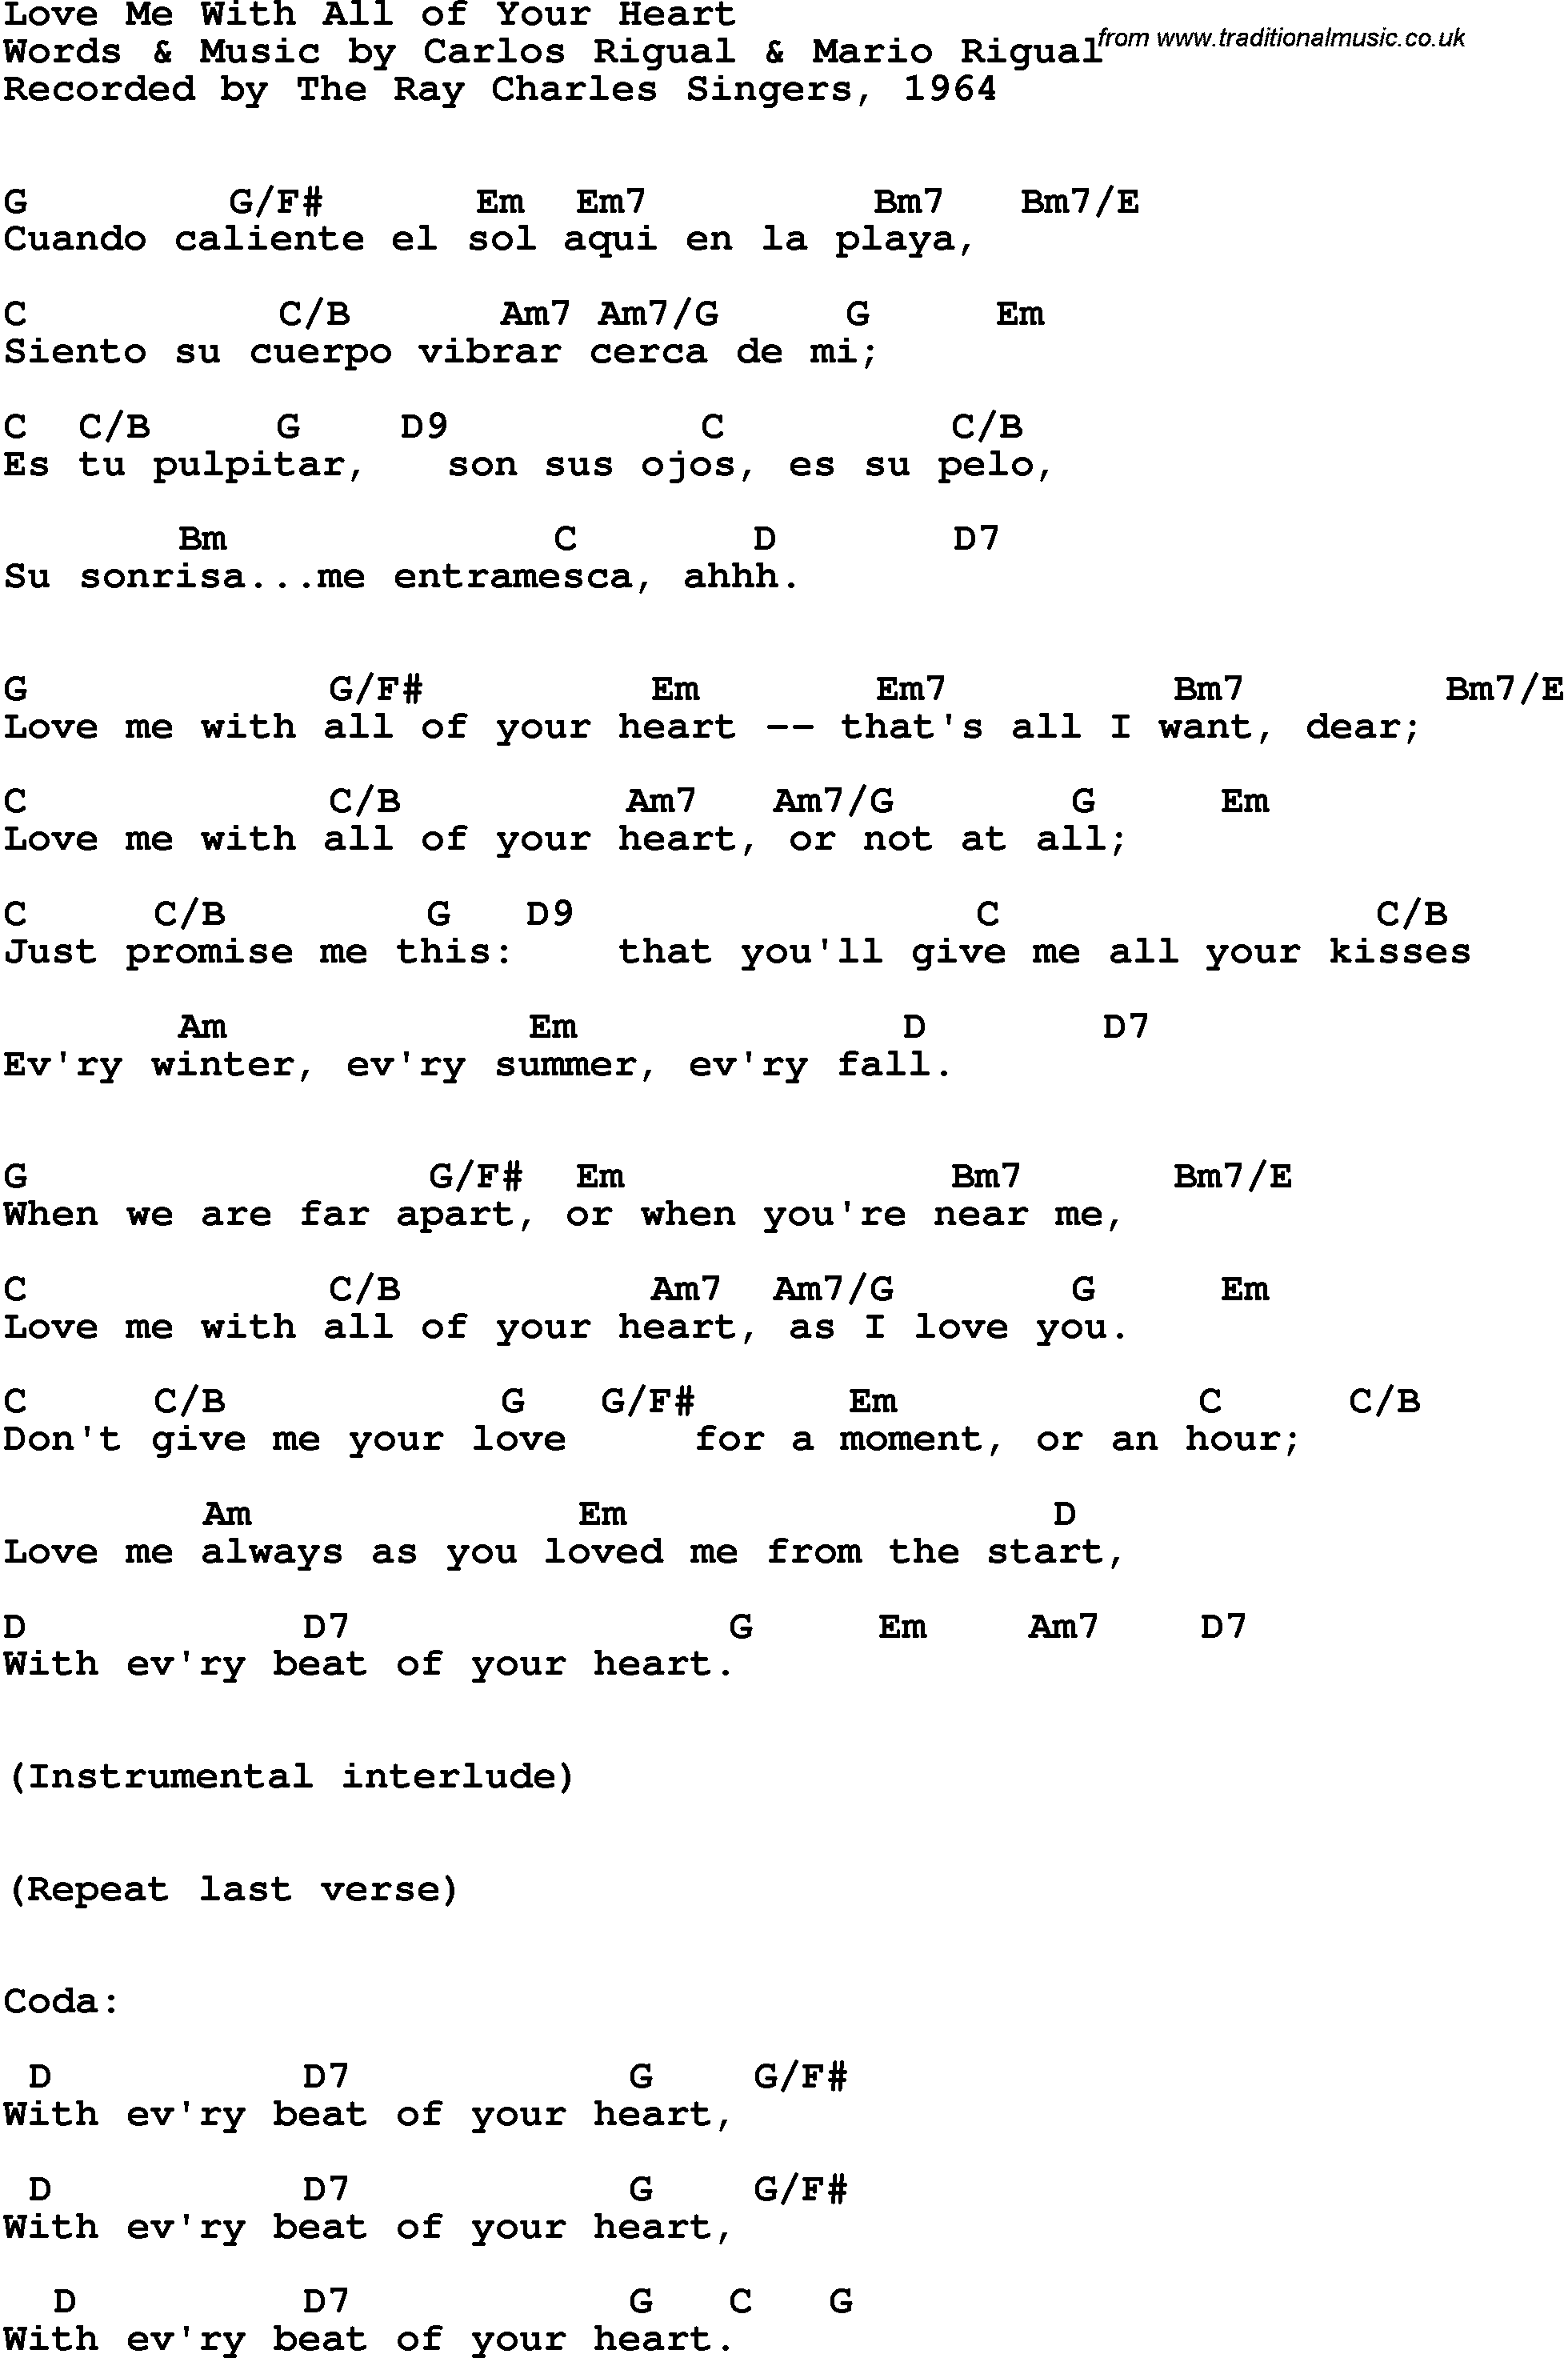 Song Lyrics with guitar chords for Love Me With All Of Your Heart - Ray Charles Singers, 1964